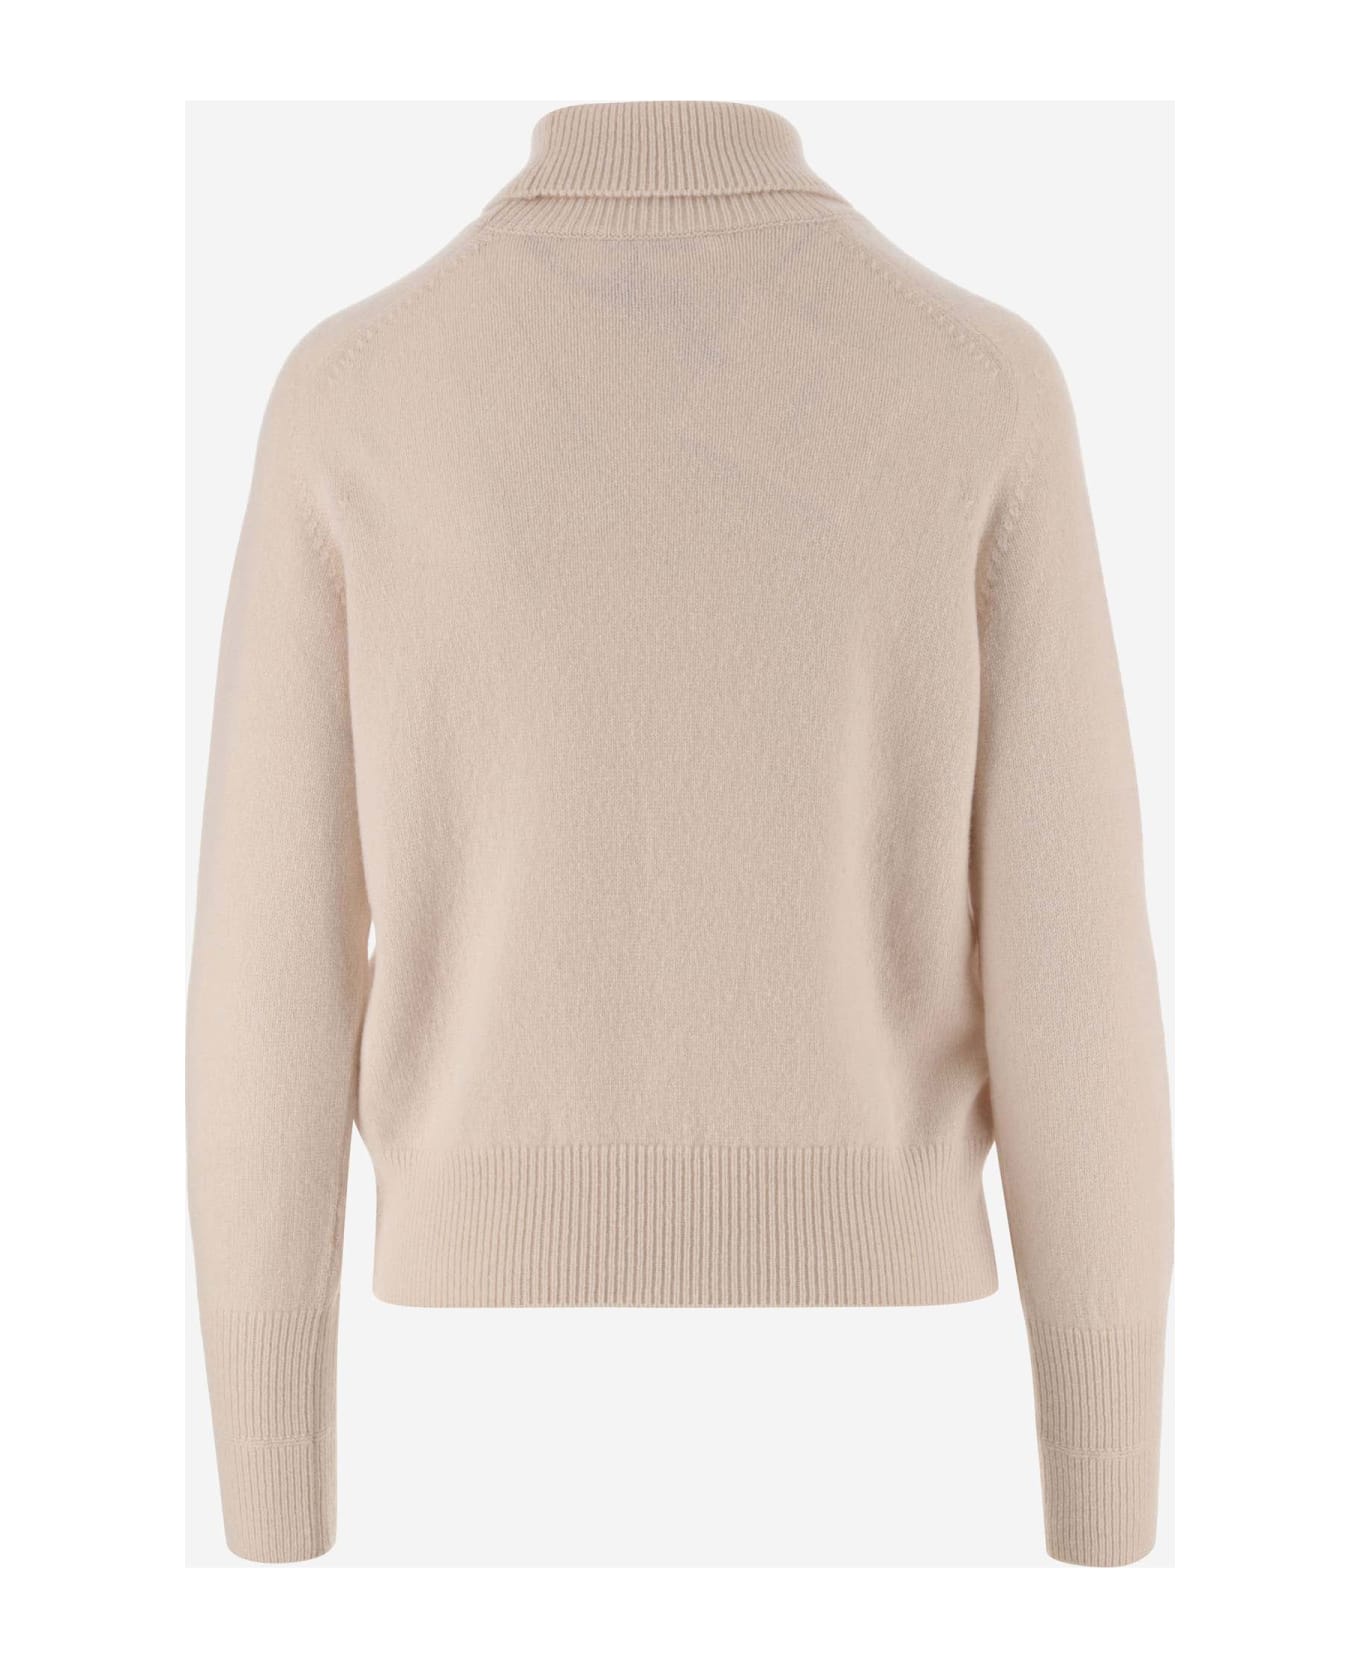 Victoria Beckham Lambswool Sweater With Logo | italist, ALWAYS LIKE A SALE